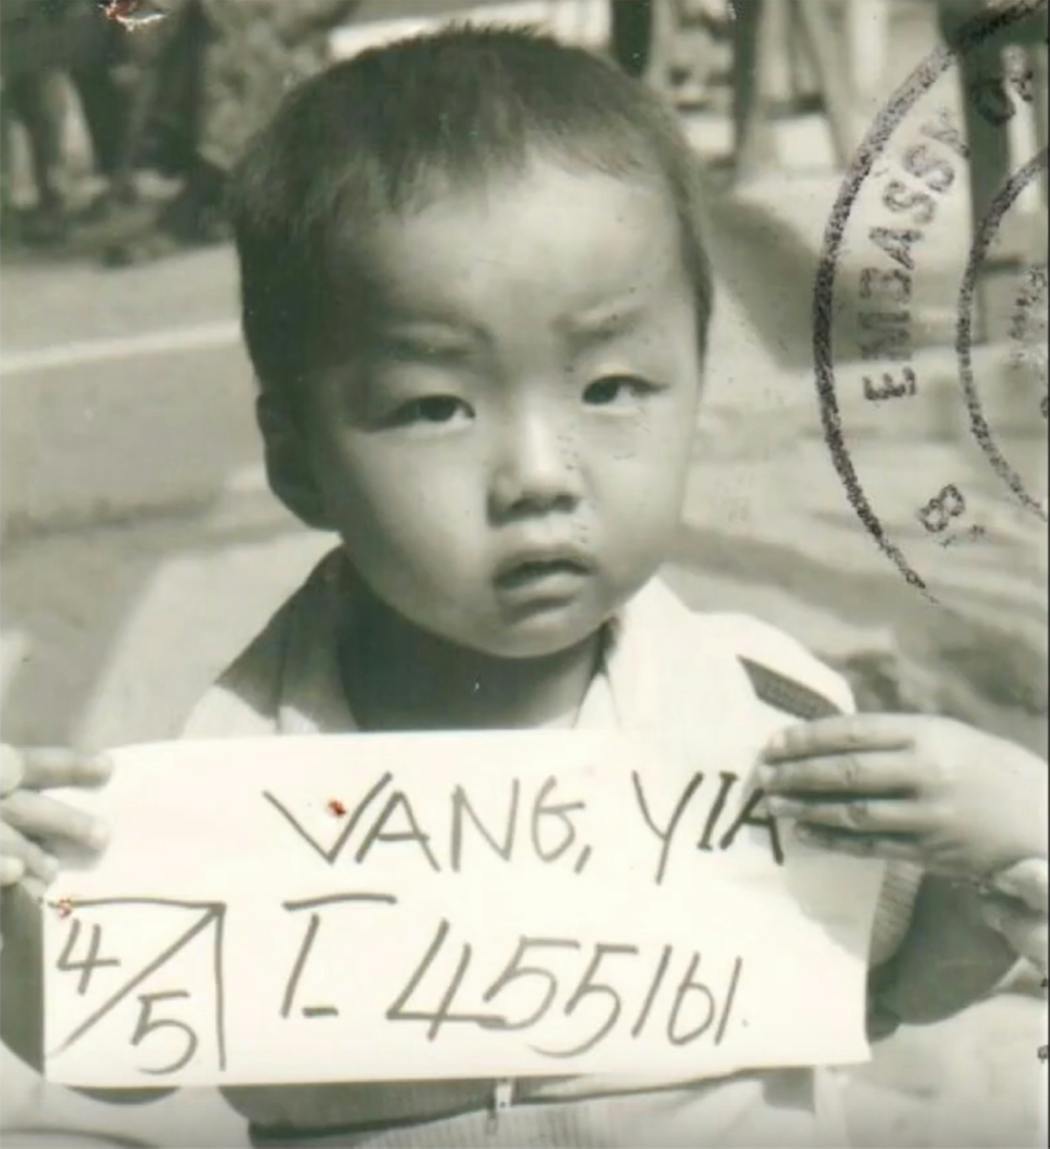  Chef Yia Vang as a child in Vinai refugee camp.